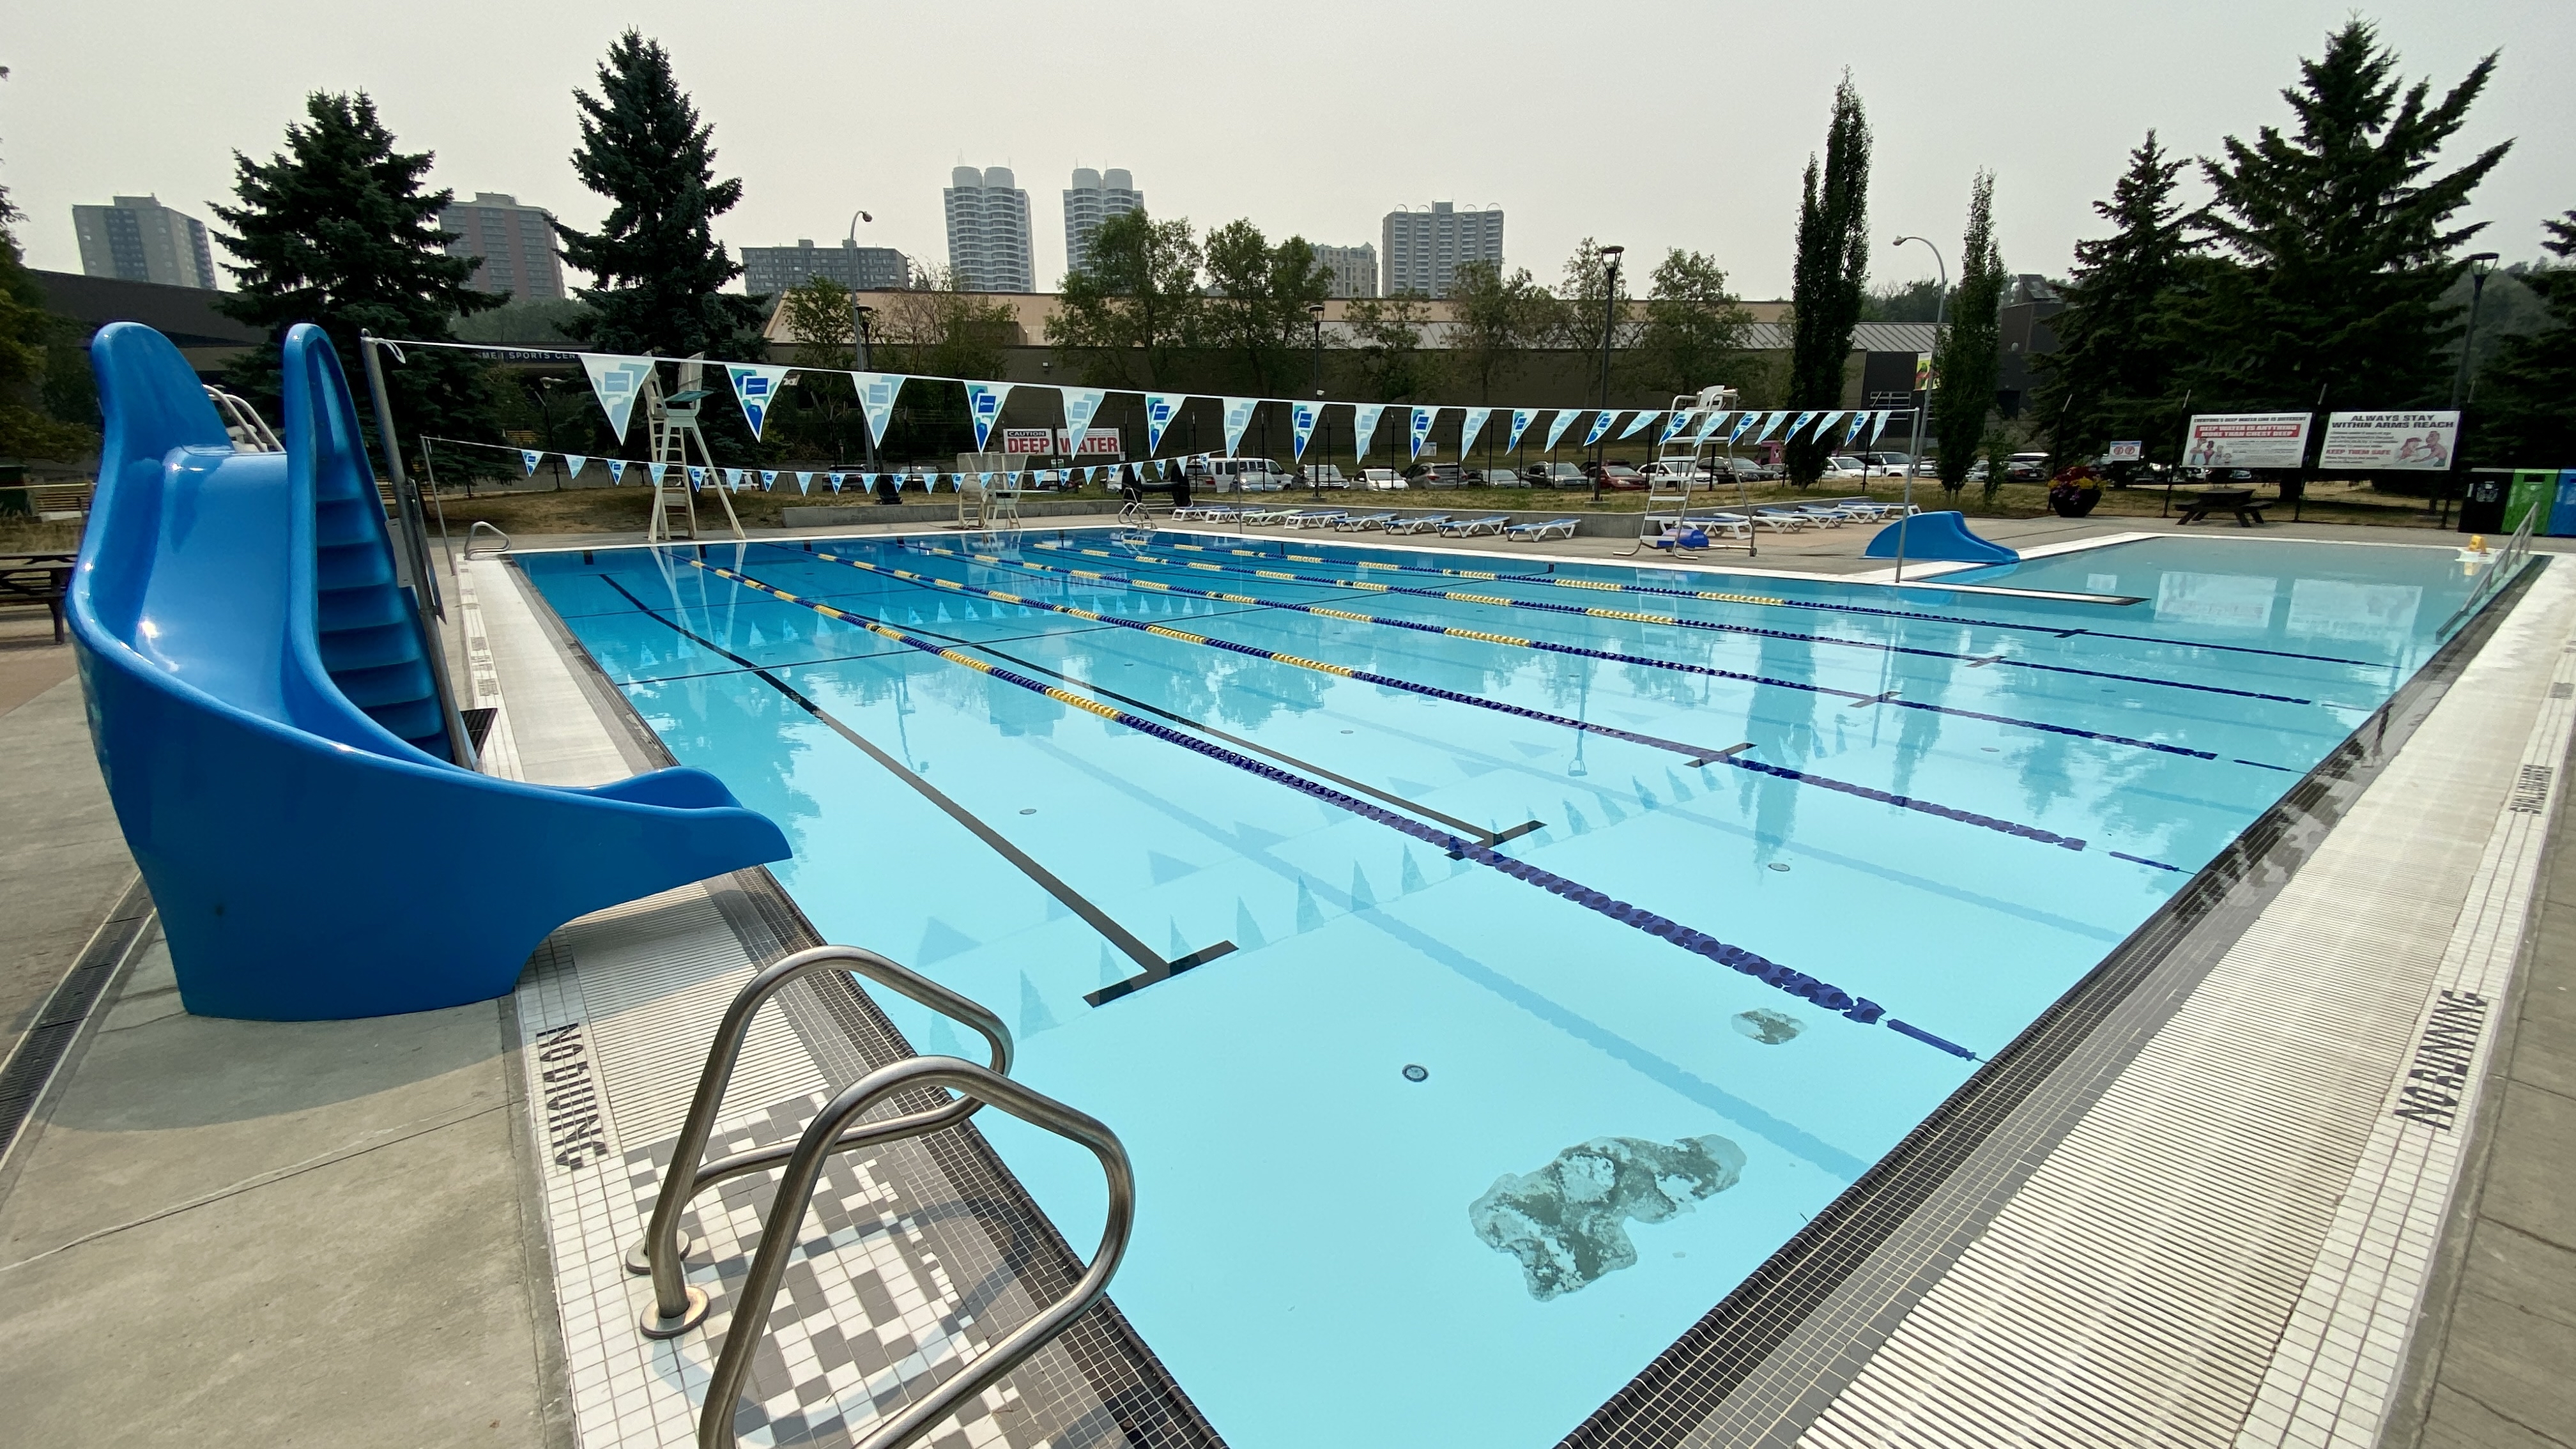 ‘This is a human rights issue’: City of Edmonton defends swimming
attire rules